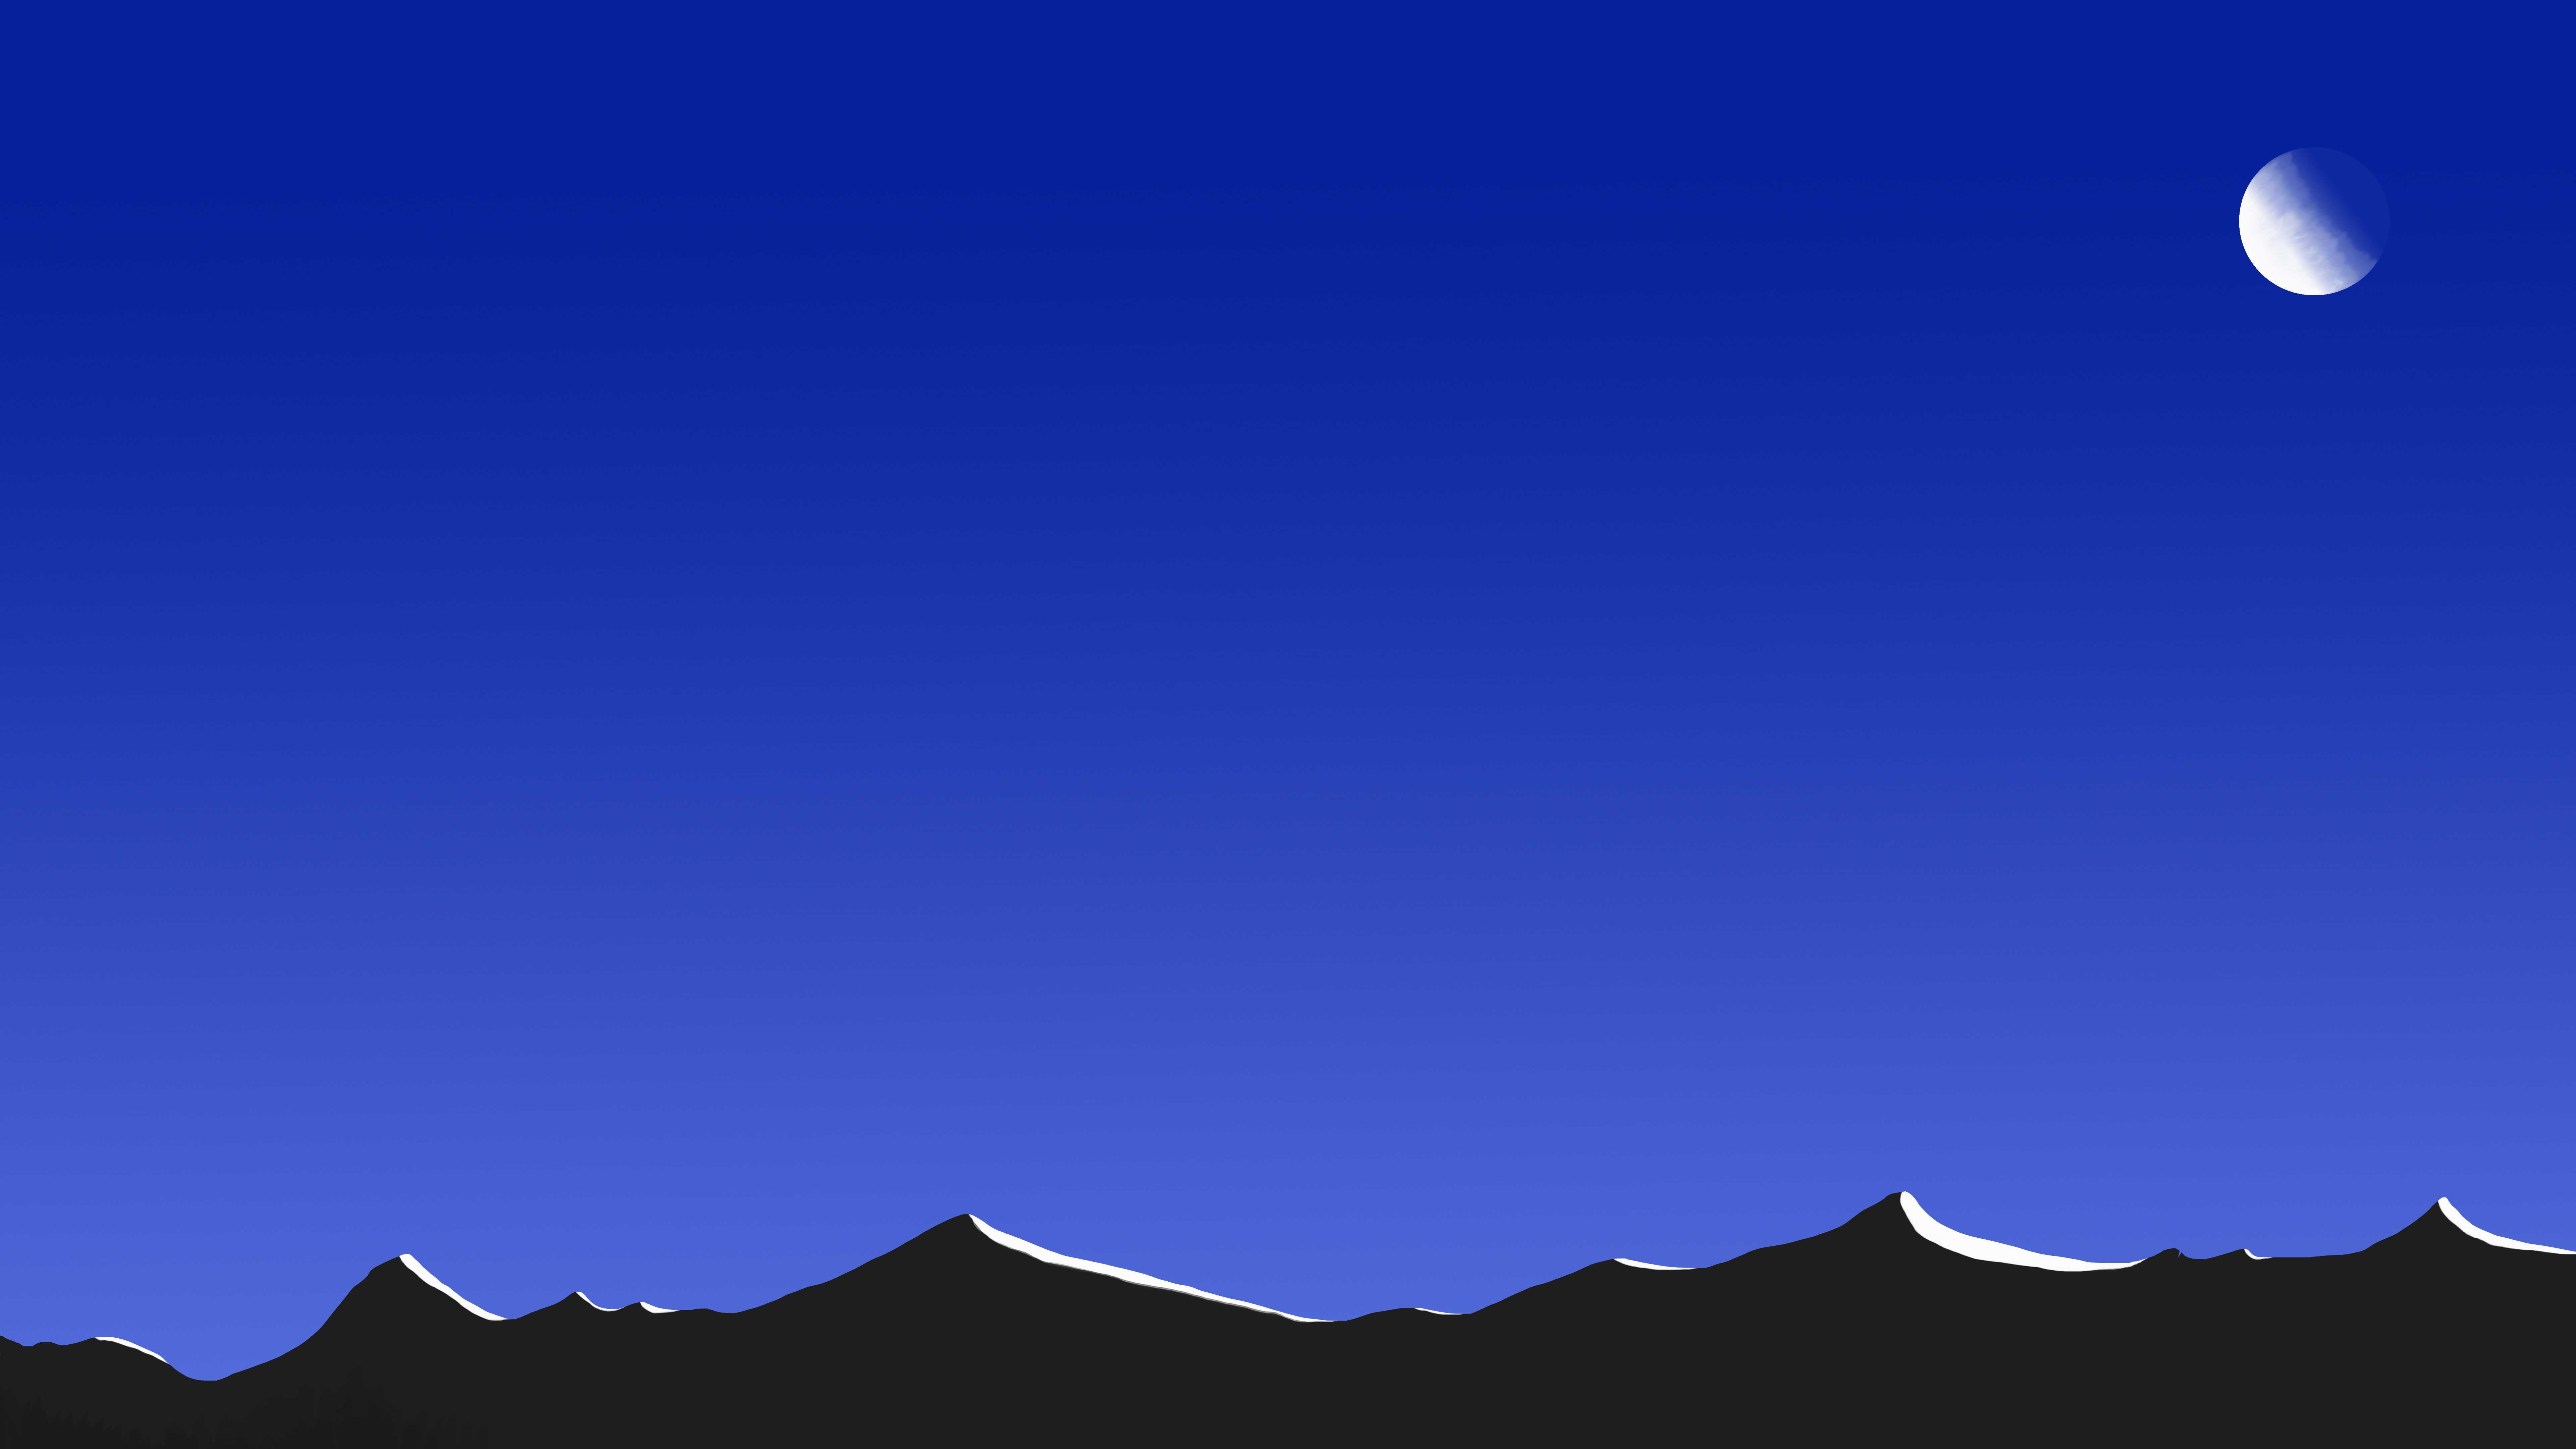 Mountain at Night with Moon by arche